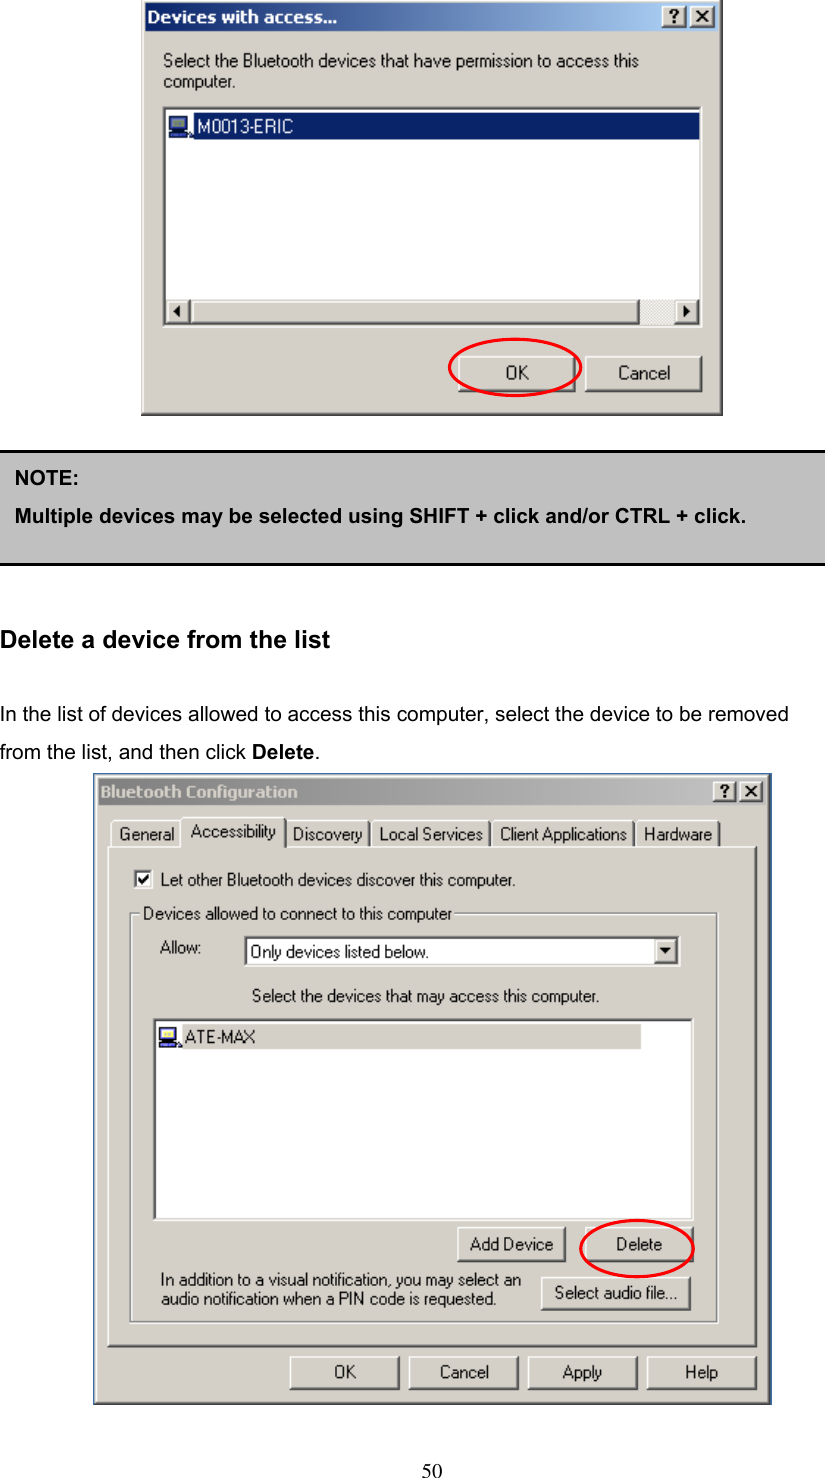       Delete a device from the list  In the list of devices allowed to access this computer, select the device to be removed from the list, and then click Delete.  NOTE:  Multiple devices may be selected using SHIFT + click and/or CTRL + click.  50 